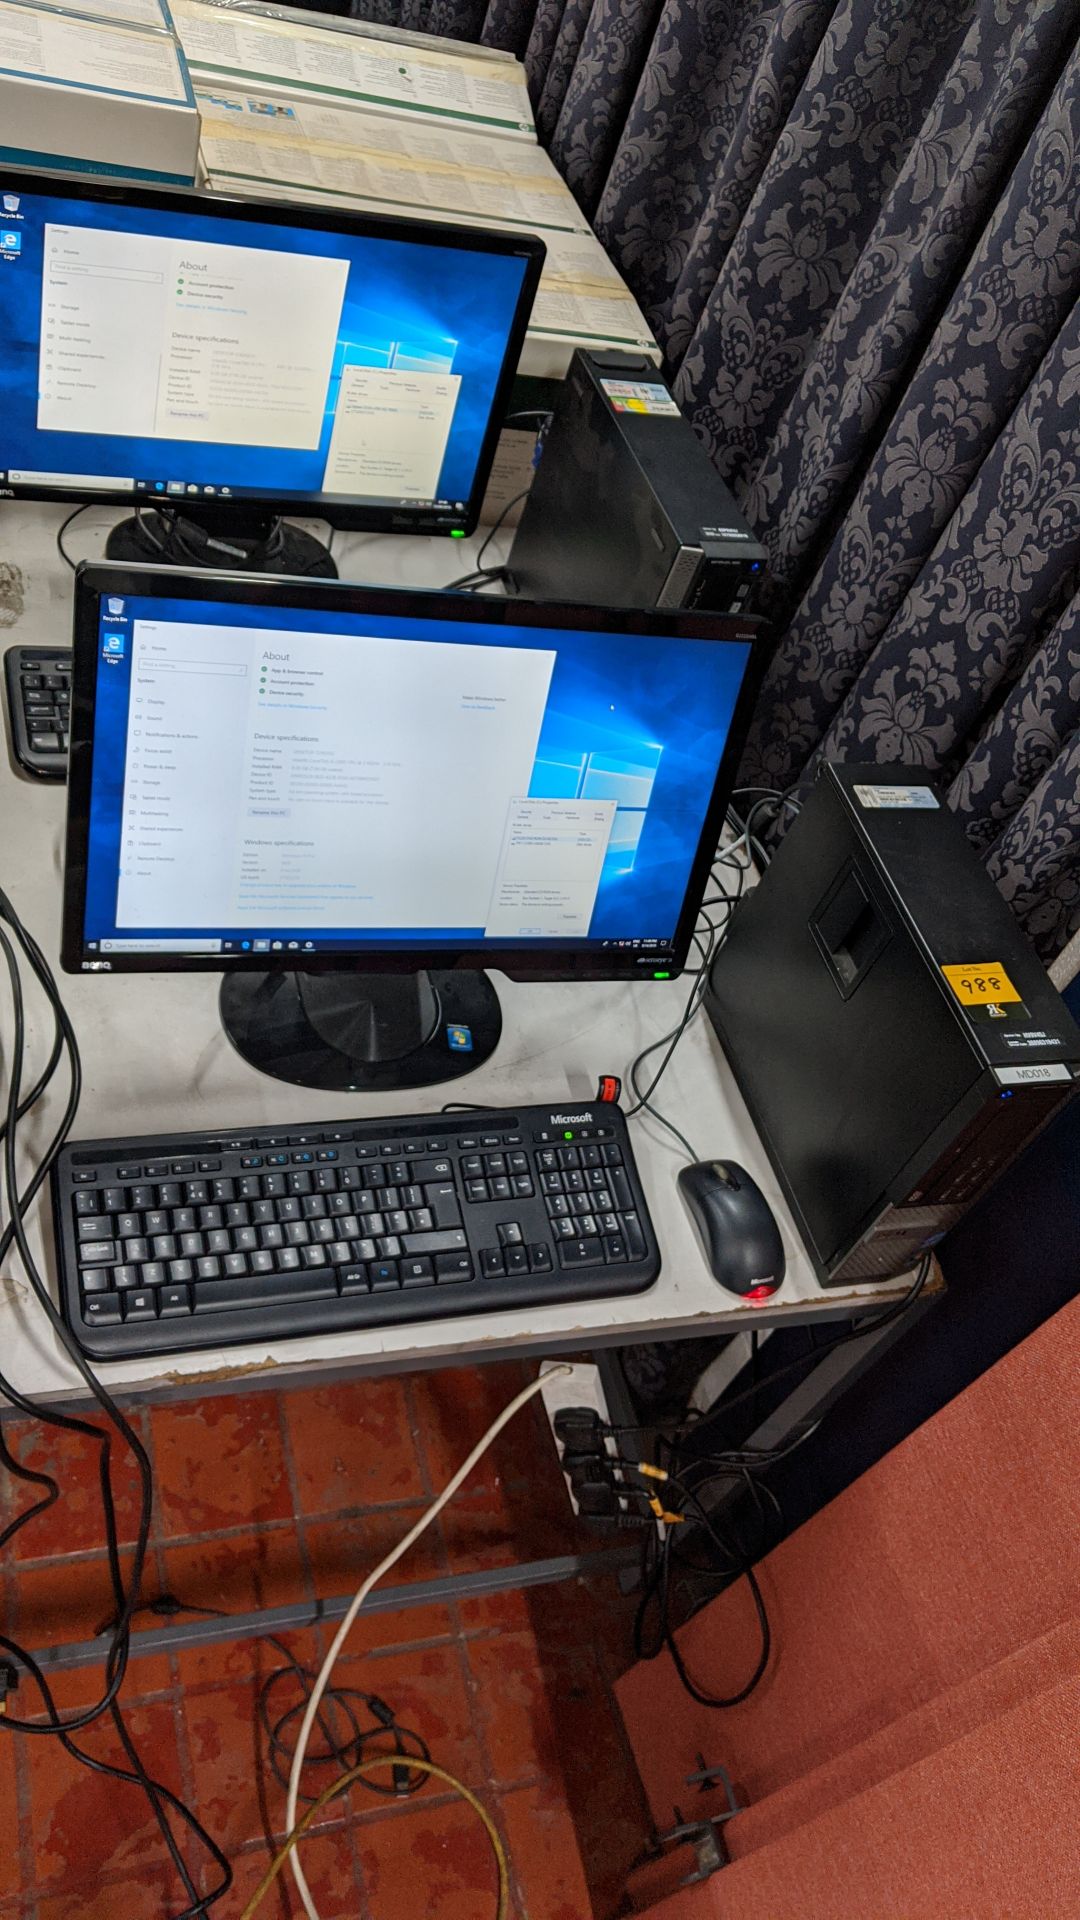 2 off Dell Optiplex tower computers with i5 processors, 8GB Ram, 1 with 240GB SSD, 1 with 250GB HDD